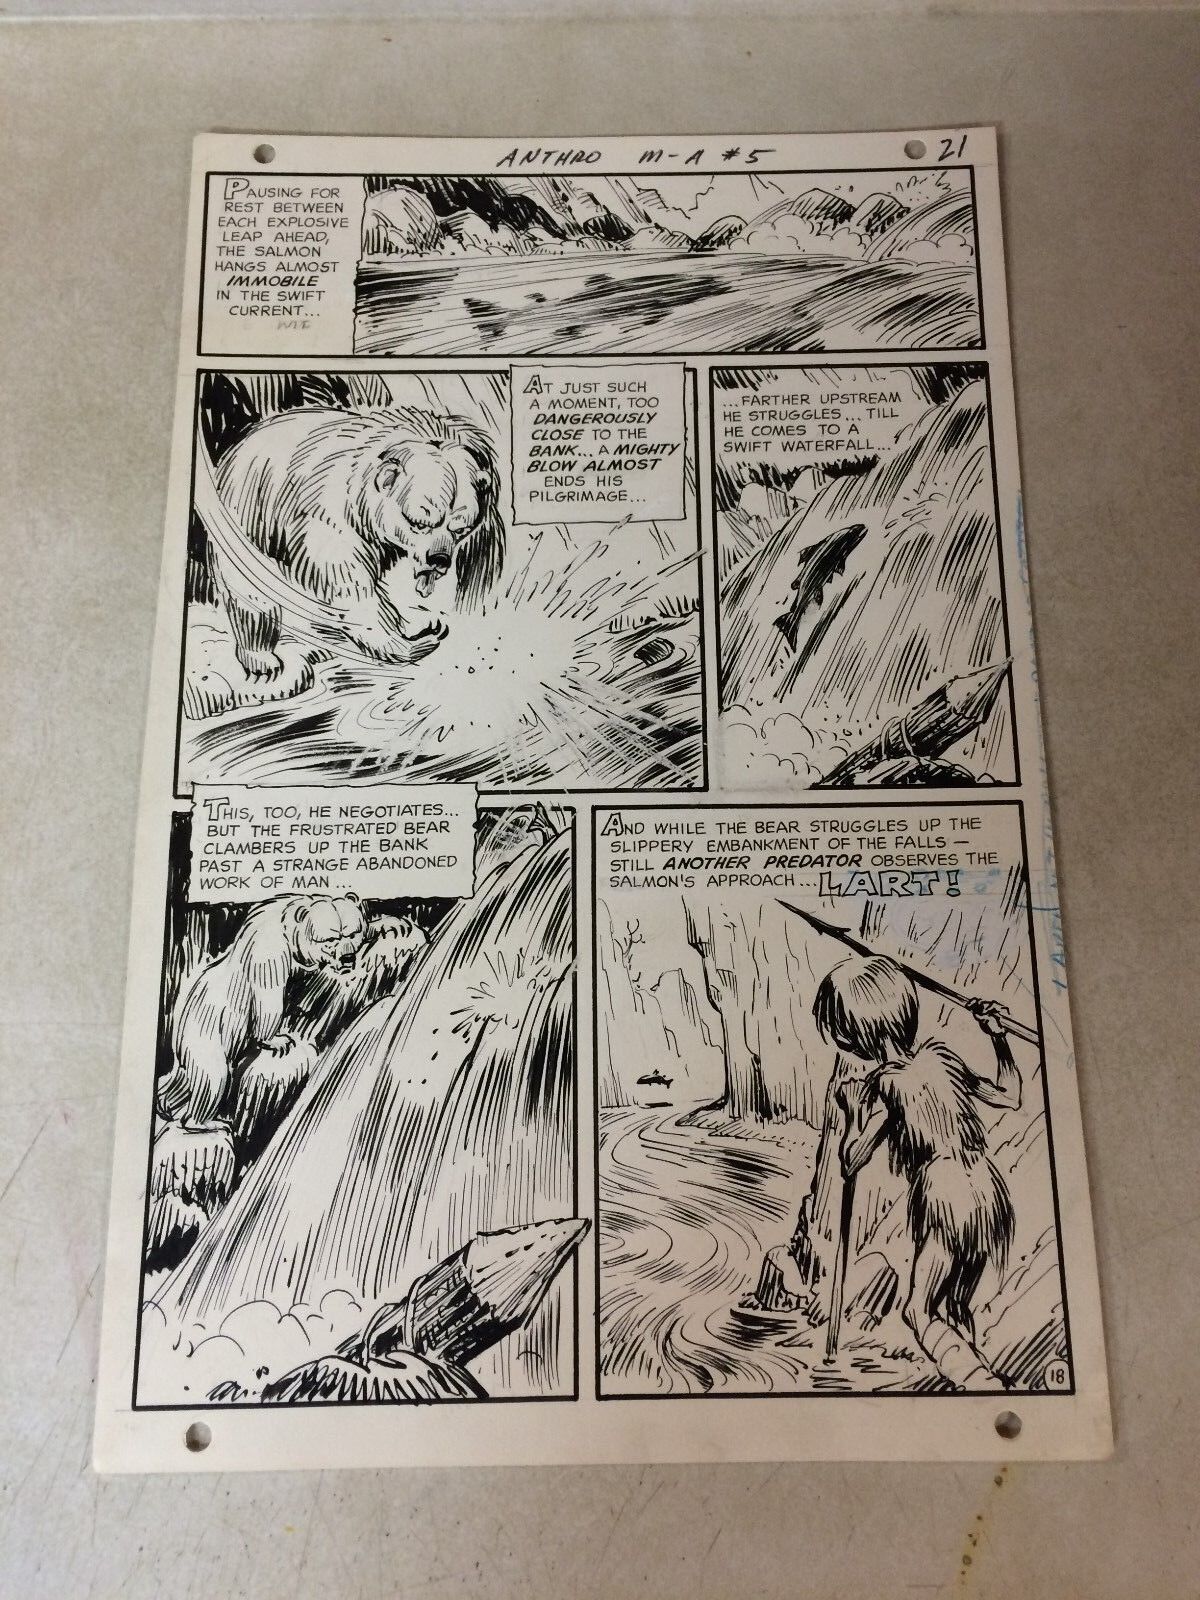 ANTHRO #5 original art 1969, LART FISHING STALKED BY GRIZZLY BEAR, HOWIE POST